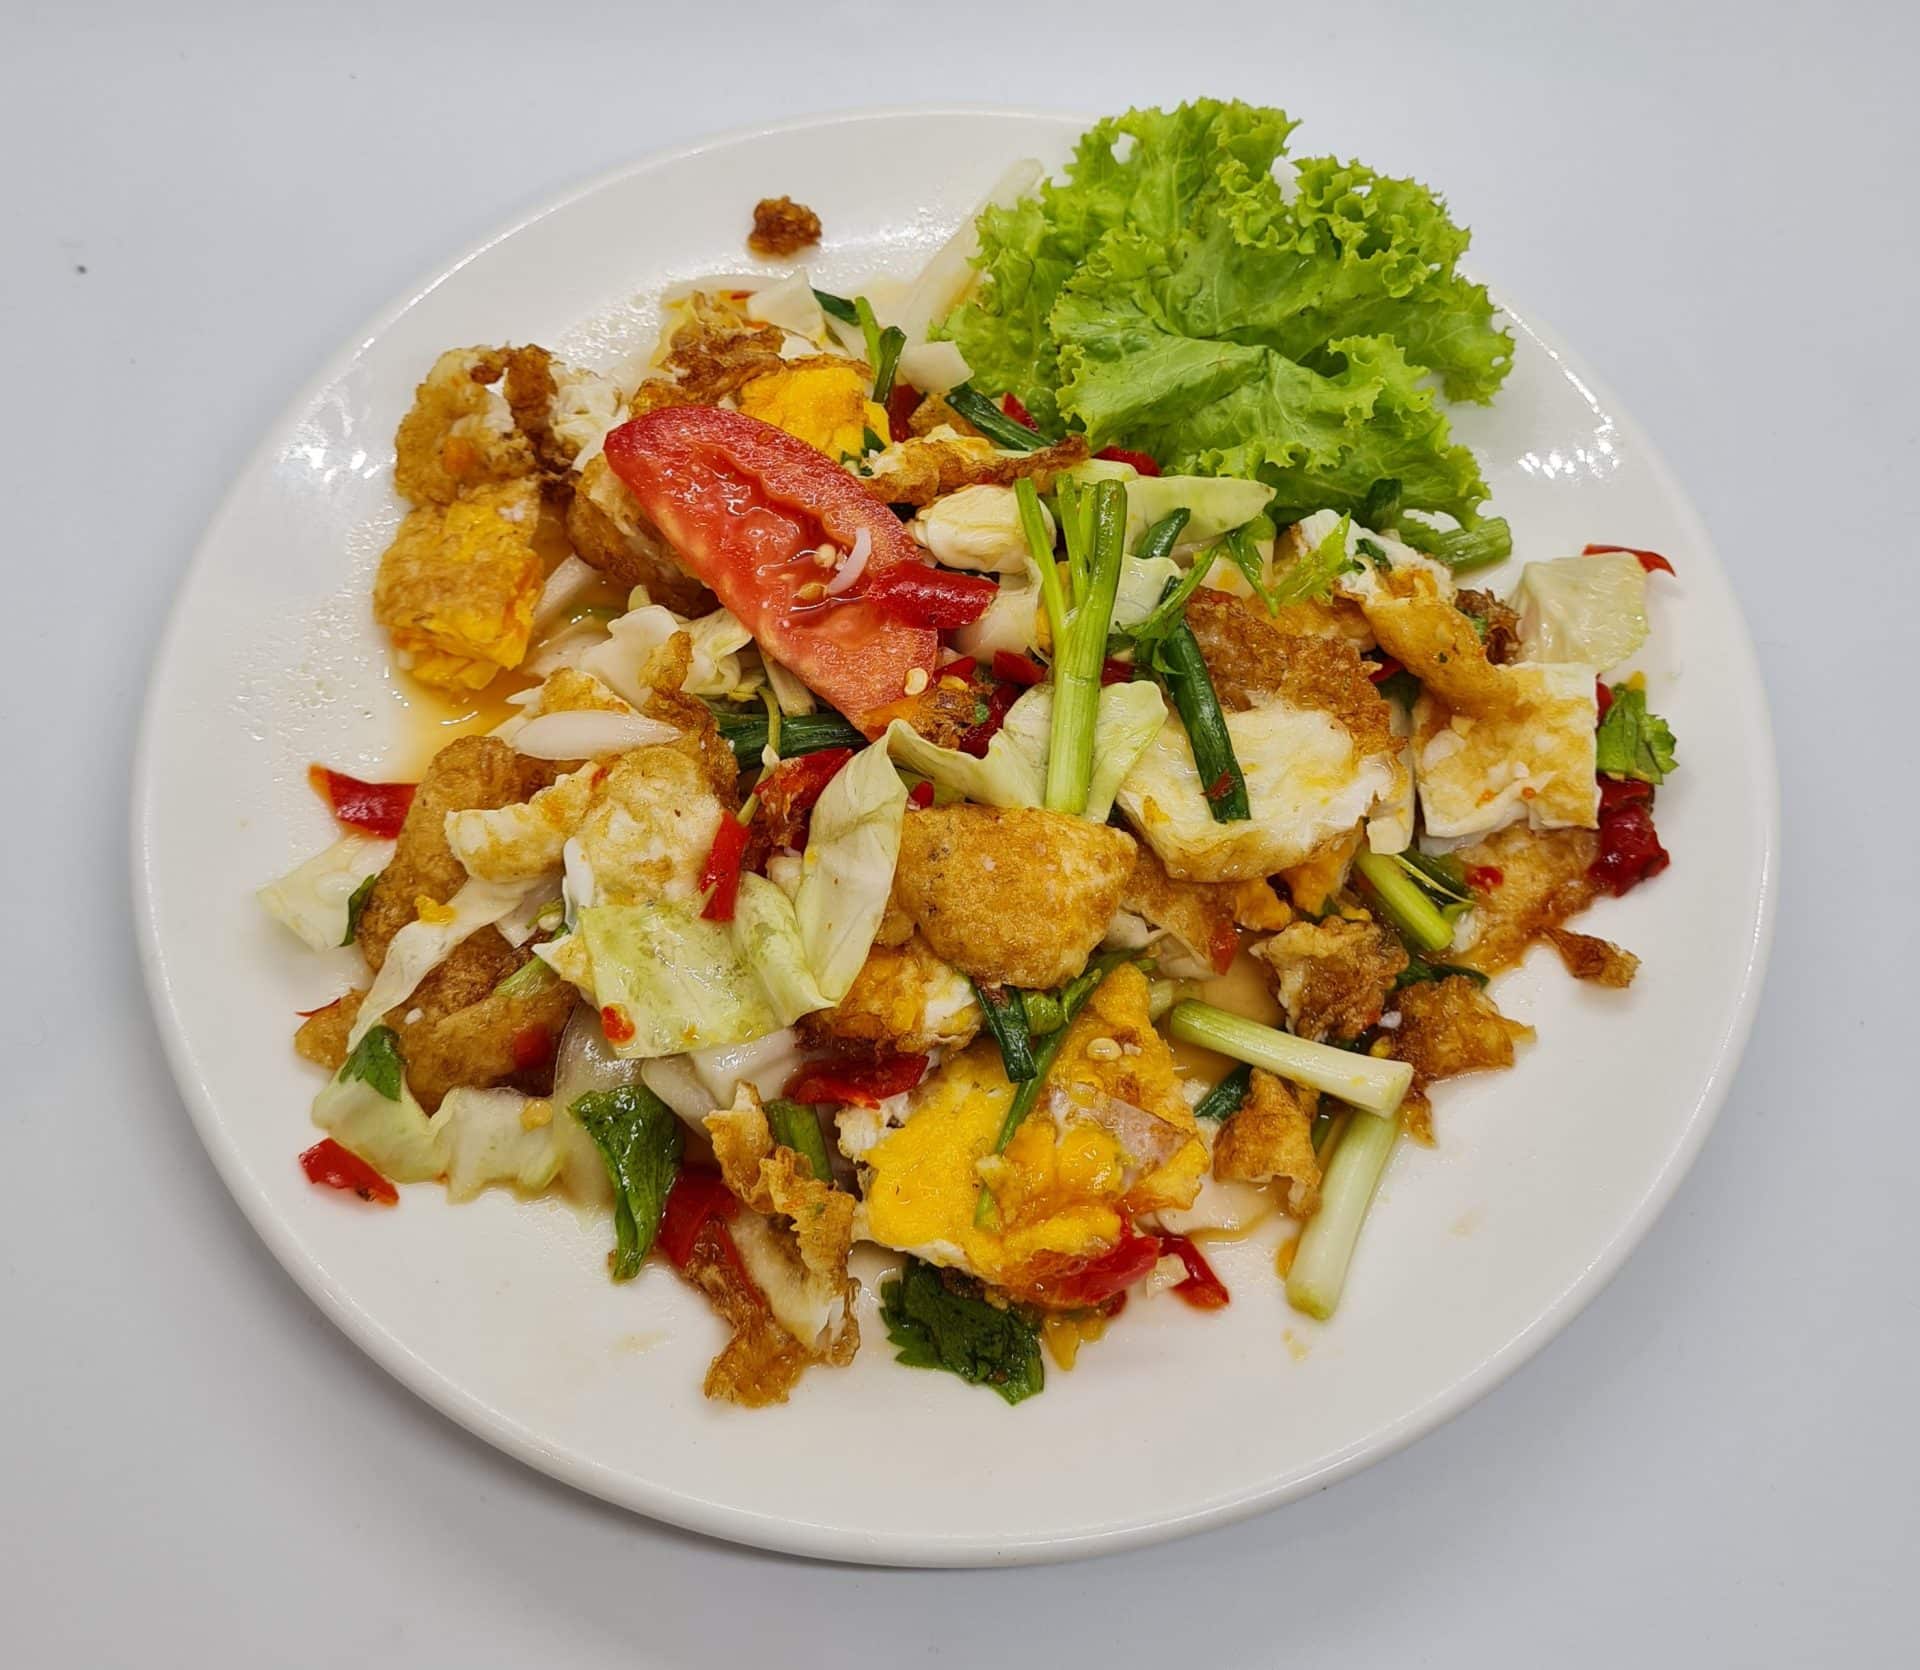 F78 Large Serving Spicy And Sour Fried Egg Salad